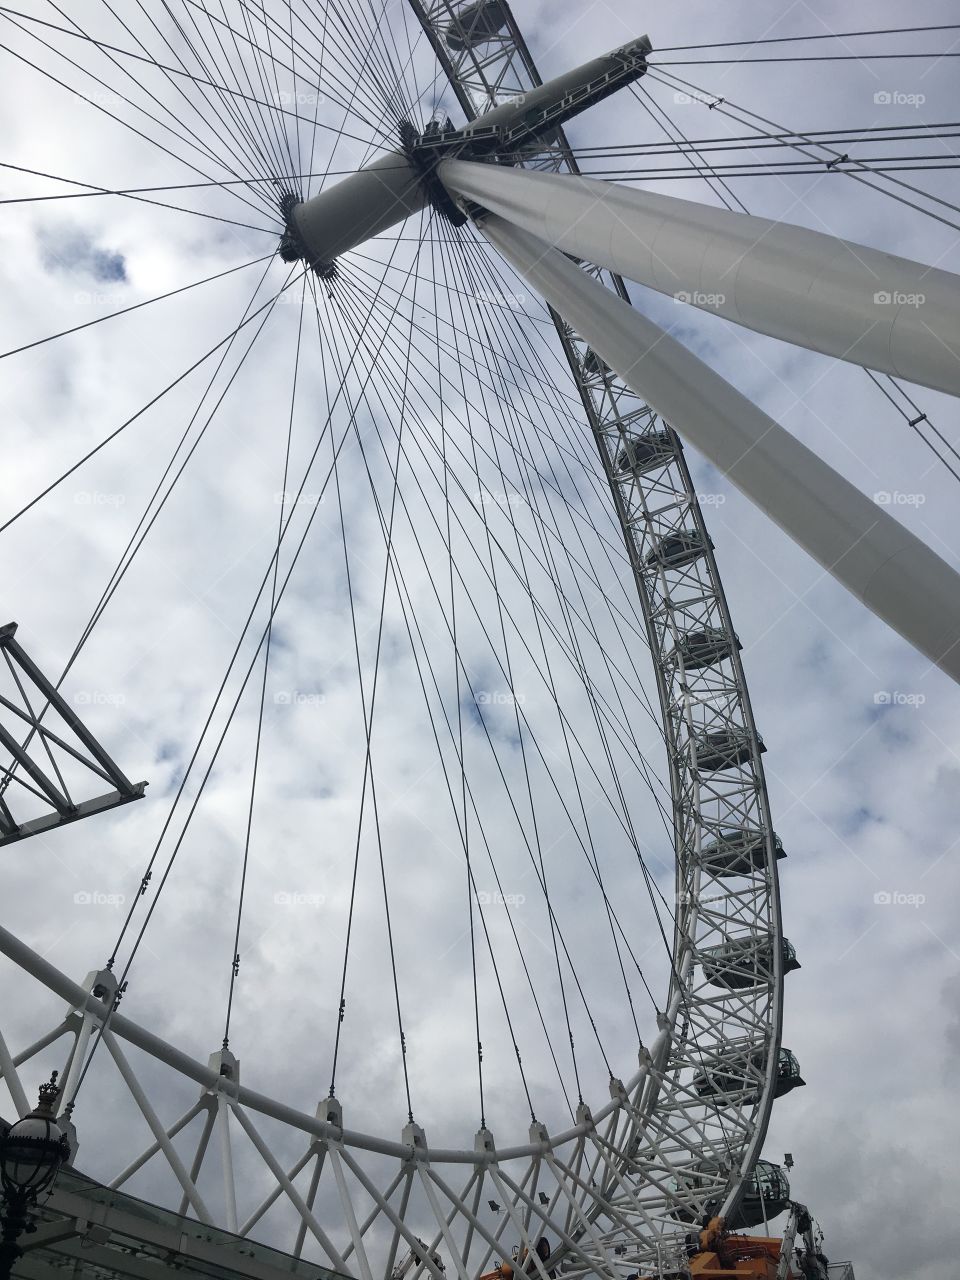 View from the bottom of the London Eye